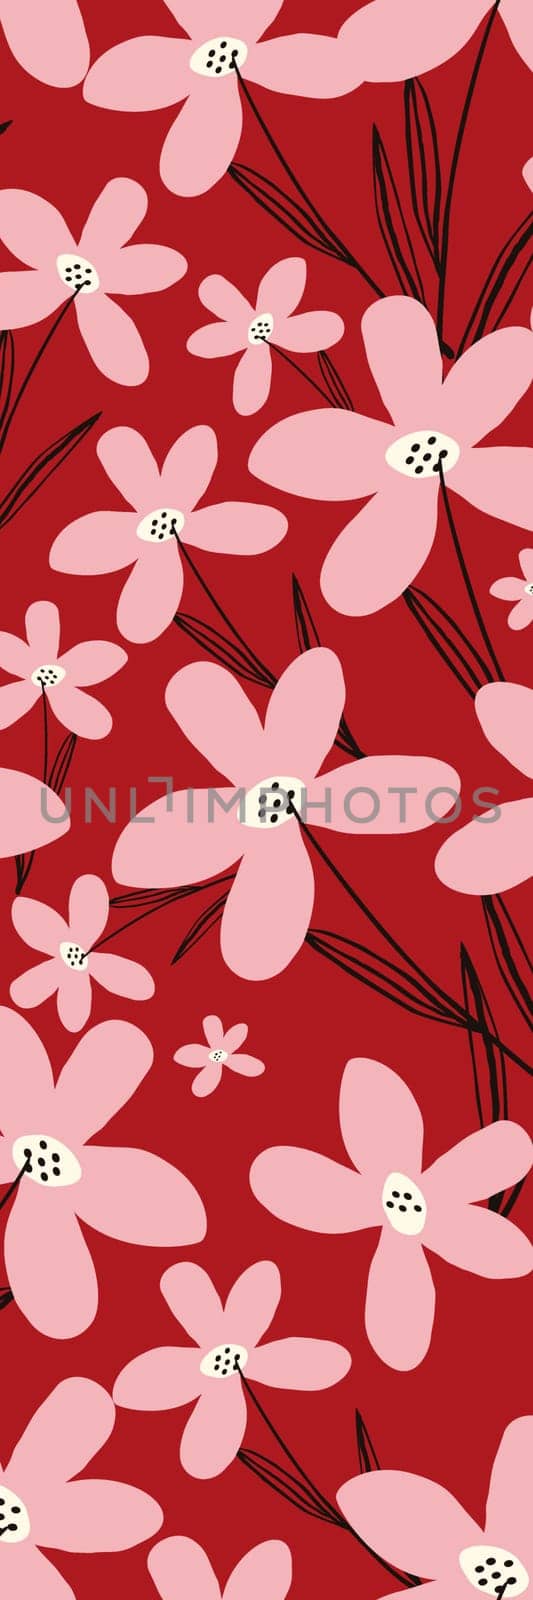 Red floral printable bookmark with spring flowers by Dustick